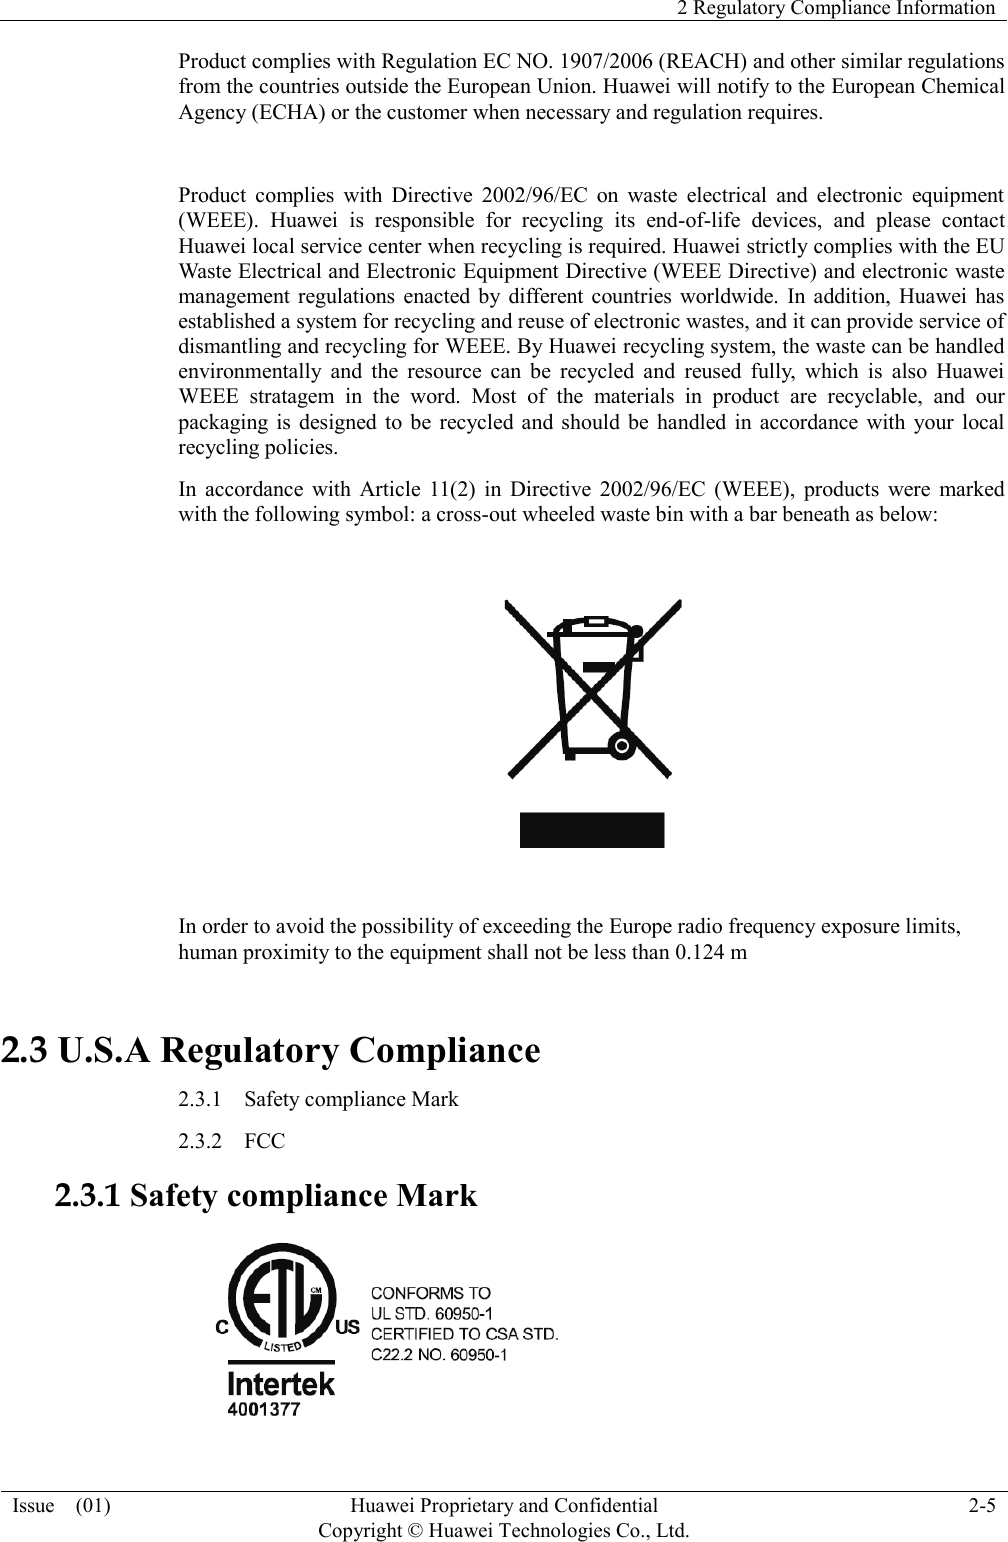   2 Regulatory Compliance Information  Issue    (01) Huawei Proprietary and Confidential                                     Copyright © Huawei Technologies Co., Ltd. 2-5  Product complies with Regulation EC NO. 1907/2006 (REACH) and other similar regulations from the countries outside the European Union. Huawei will notify to the European Chemical Agency (ECHA) or the customer when necessary and regulation requires.  Product  complies  with  Directive  2002/96/EC  on  waste  electrical  and  electronic  equipment (WEEE).  Huawei  is  responsible  for  recycling  its  end-of-life  devices,  and  please  contact Huawei local service center when recycling is required. Huawei strictly complies with the EU Waste Electrical and Electronic Equipment Directive (WEEE Directive) and electronic waste management  regulations  enacted by  different  countries  worldwide.  In  addition, Huawei  has established a system for recycling and reuse of electronic wastes, and it can provide service of dismantling and recycling for WEEE. By Huawei recycling system, the waste can be handled environmentally  and  the  resource  can  be  recycled  and  reused  fully,  which  is  also  Huawei WEEE  stratagem  in  the  word.  Most  of  the  materials  in  product  are  recyclable,  and  our packaging  is  designed  to  be  recycled and  should  be  handled  in  accordance with  your local recycling policies.   In  accordance  with  Article  11(2)  in  Directive  2002/96/EC  (WEEE),  products  were  marked with the following symbol: a cross-out wheeled waste bin with a bar beneath as below:    In order to avoid the possibility of exceeding the Europe radio frequency exposure limits, human proximity to the equipment shall not be less than 0.124 m 2.3 U.S.A Regulatory Compliance 2.3.1    Safety compliance Mark   2.3.2  FCC   2.3.1 Safety compliance Mark    